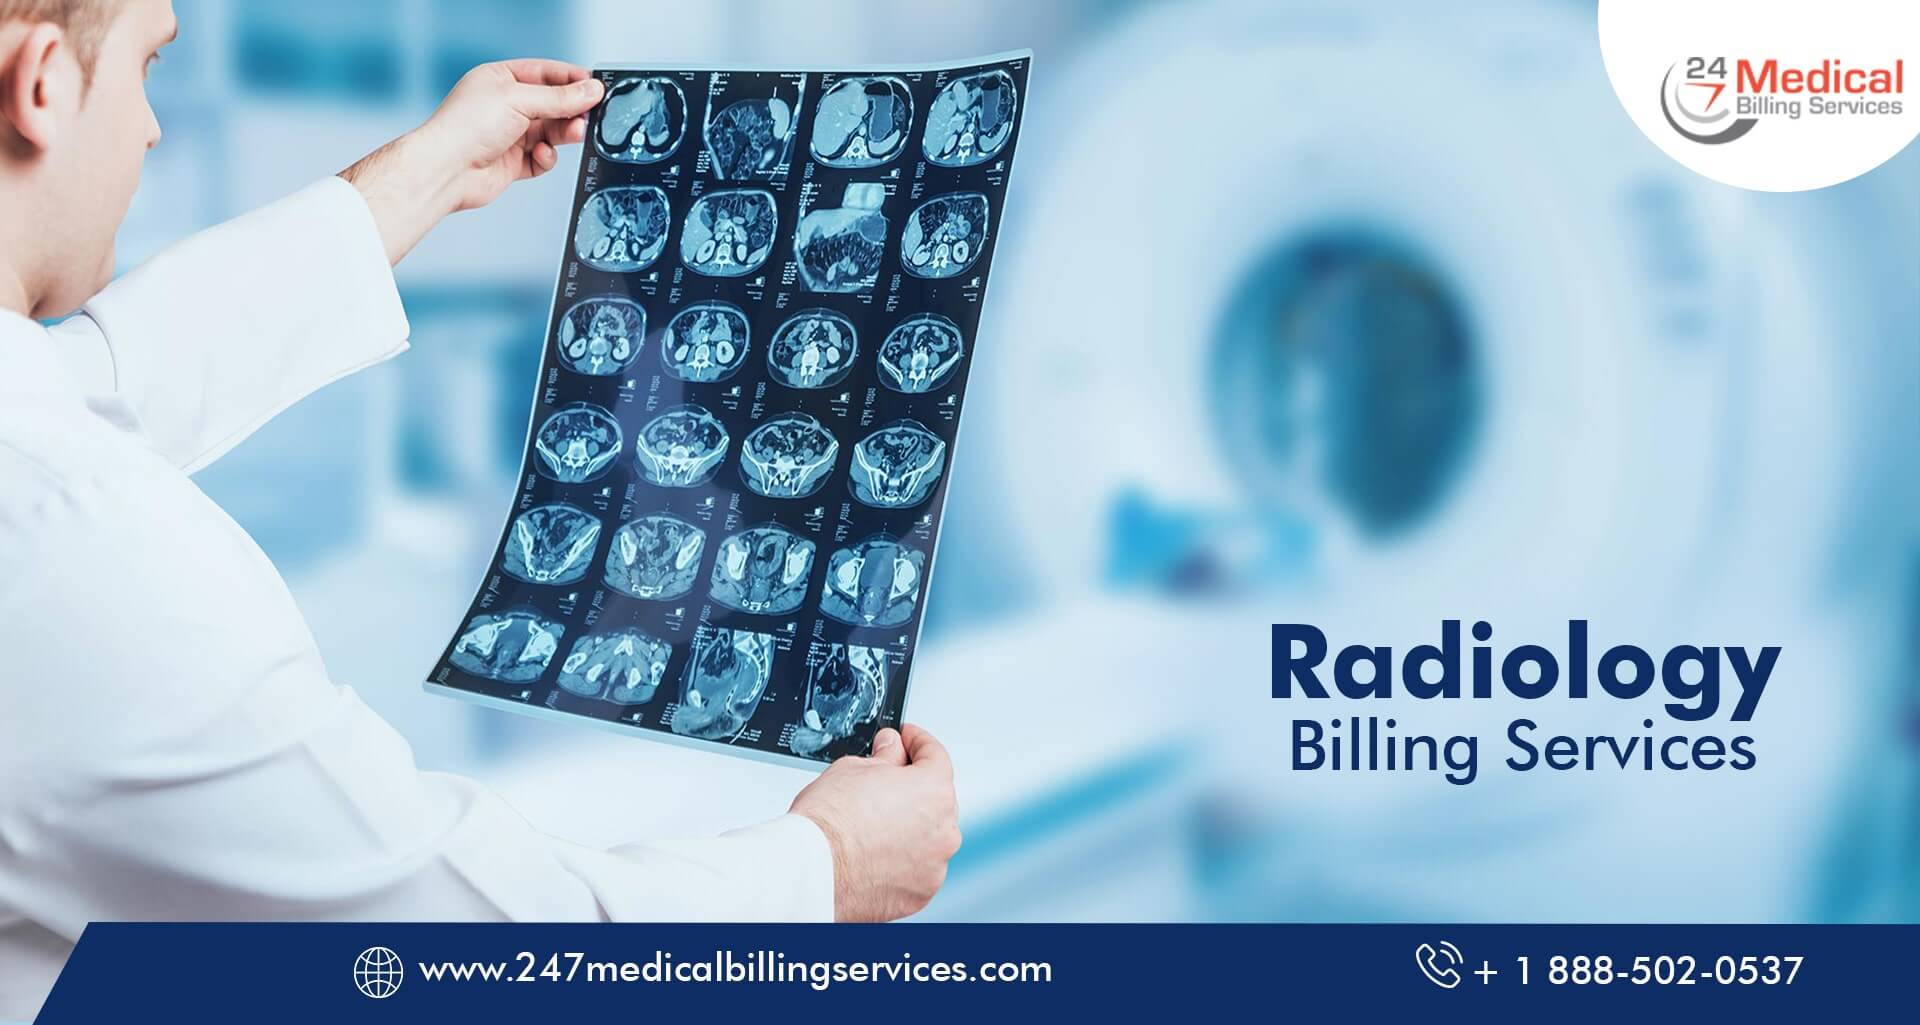  Radiology Billing Services in Dayton, Ohio (OH)